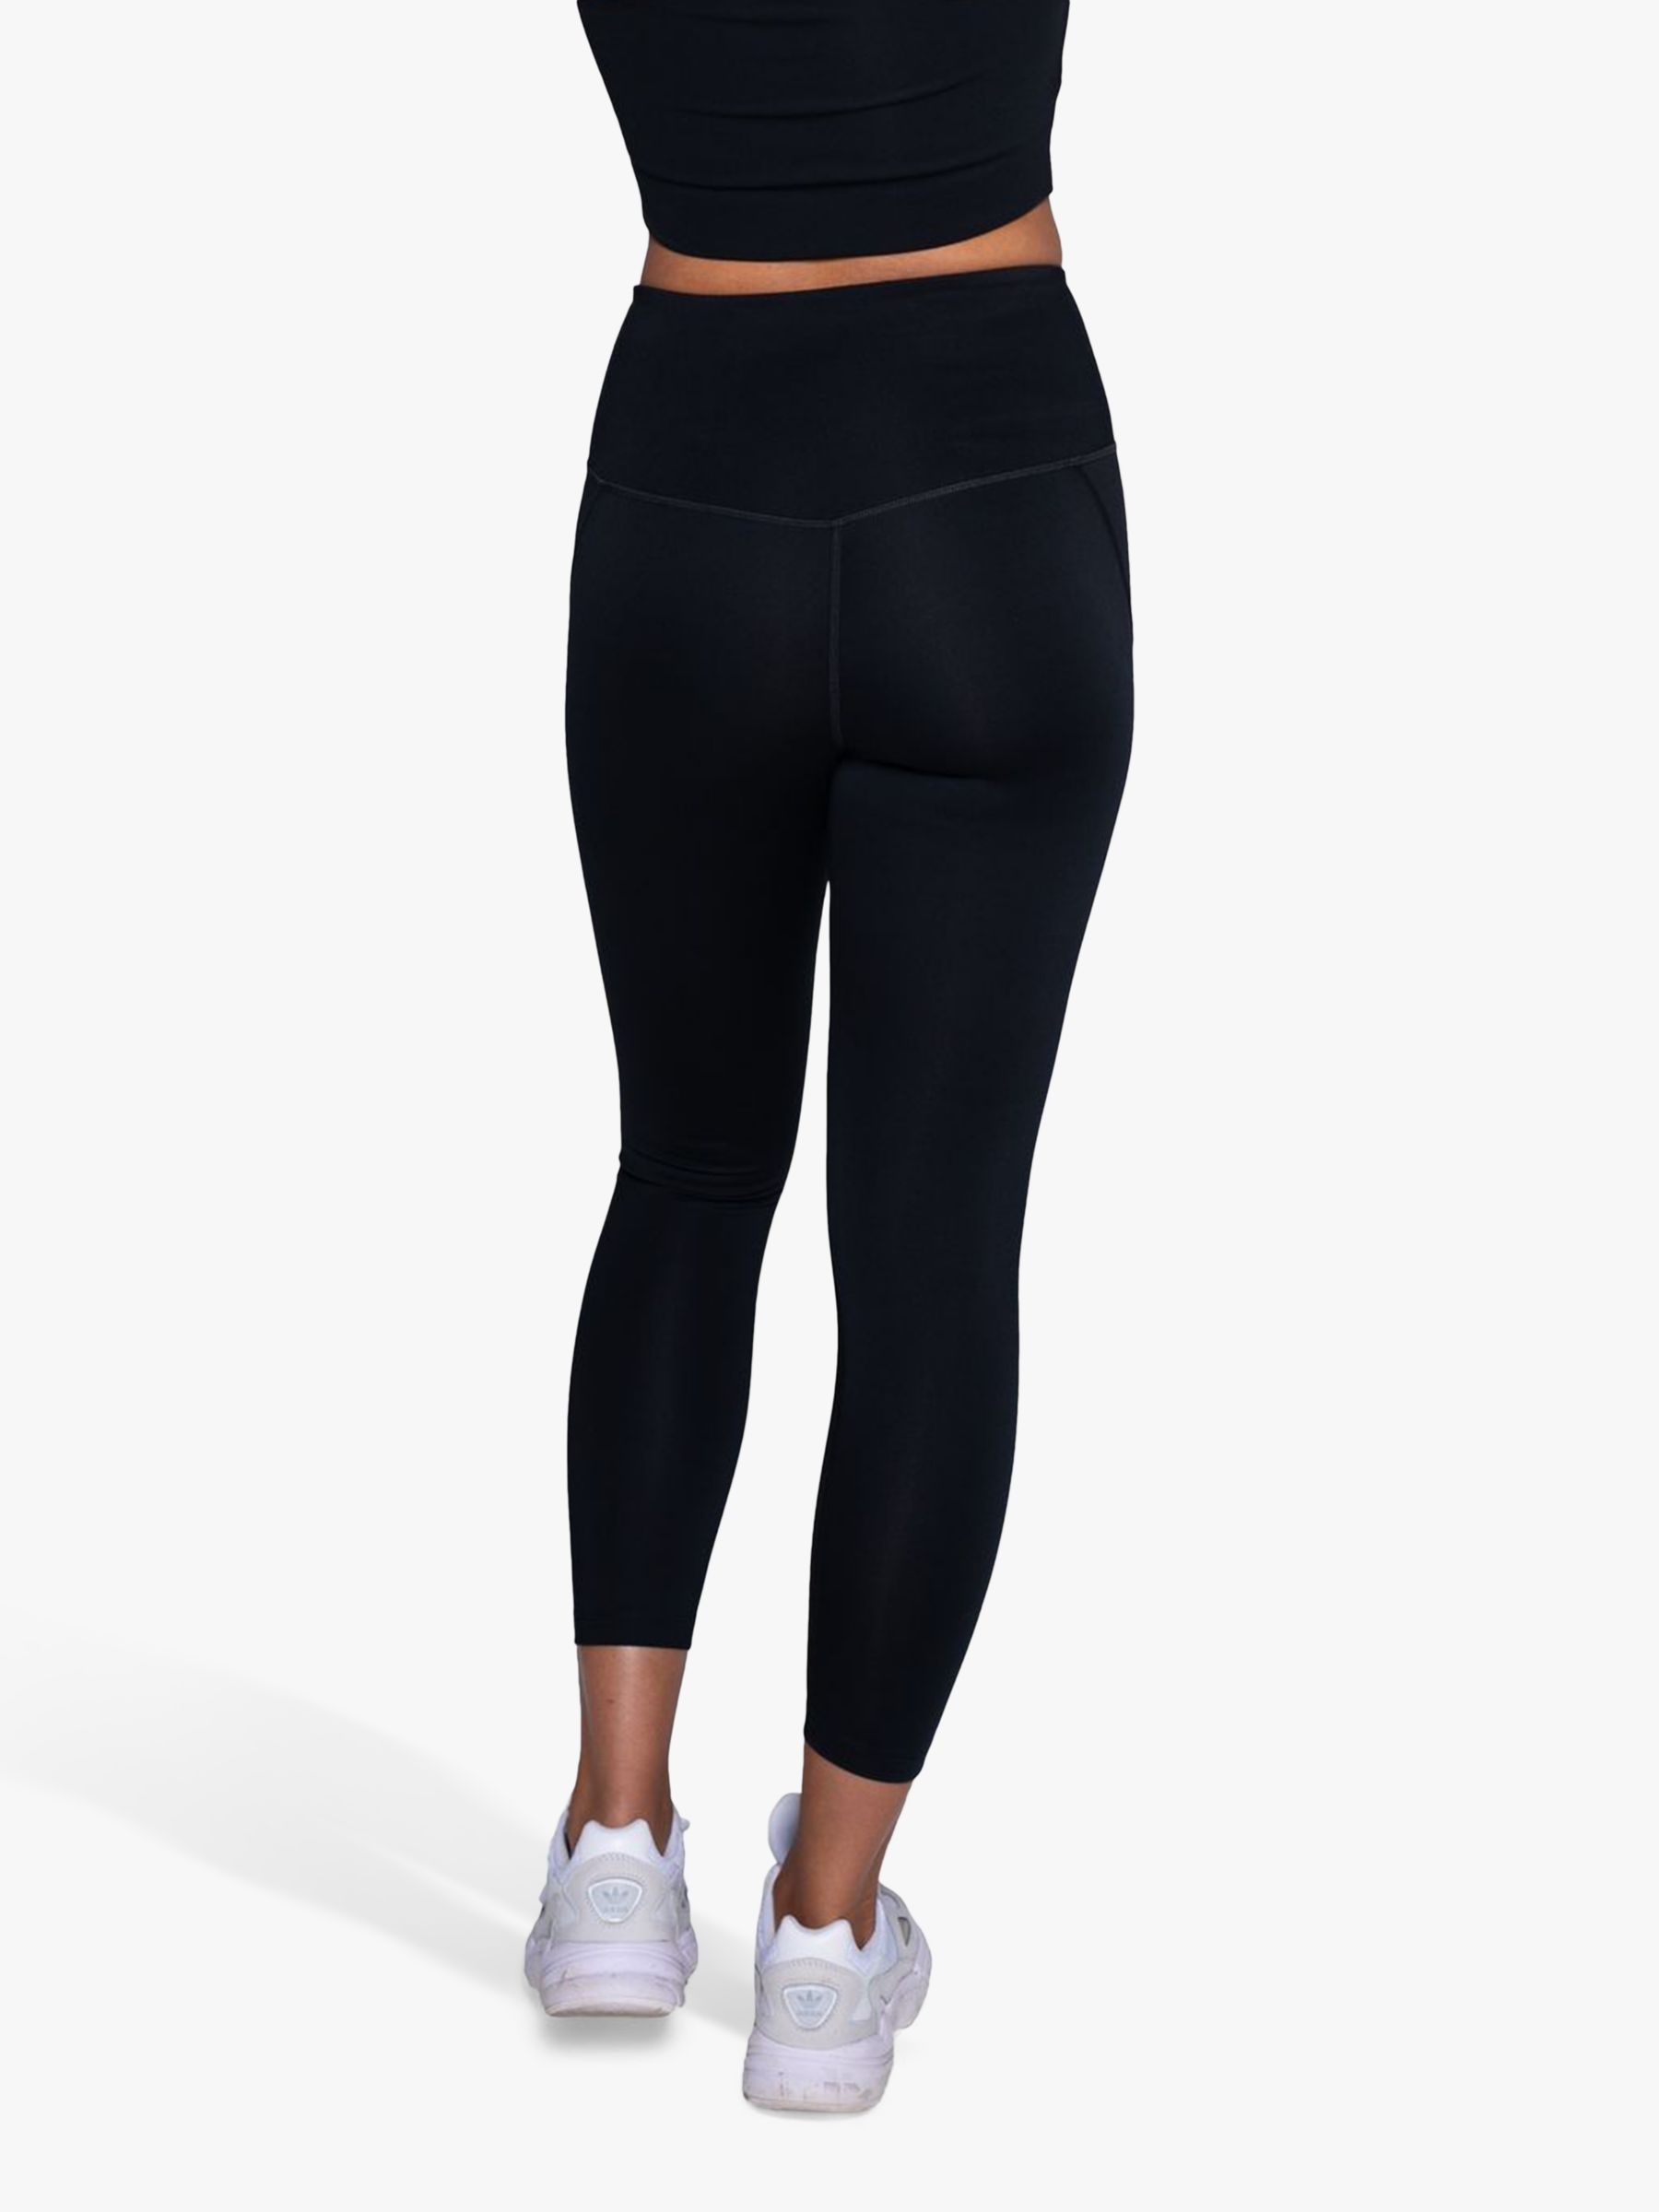 You'll love these new Black Herringbone Hi-Rise 7/8 leggings!! This  high-performance design offers firm compression coupled with a class